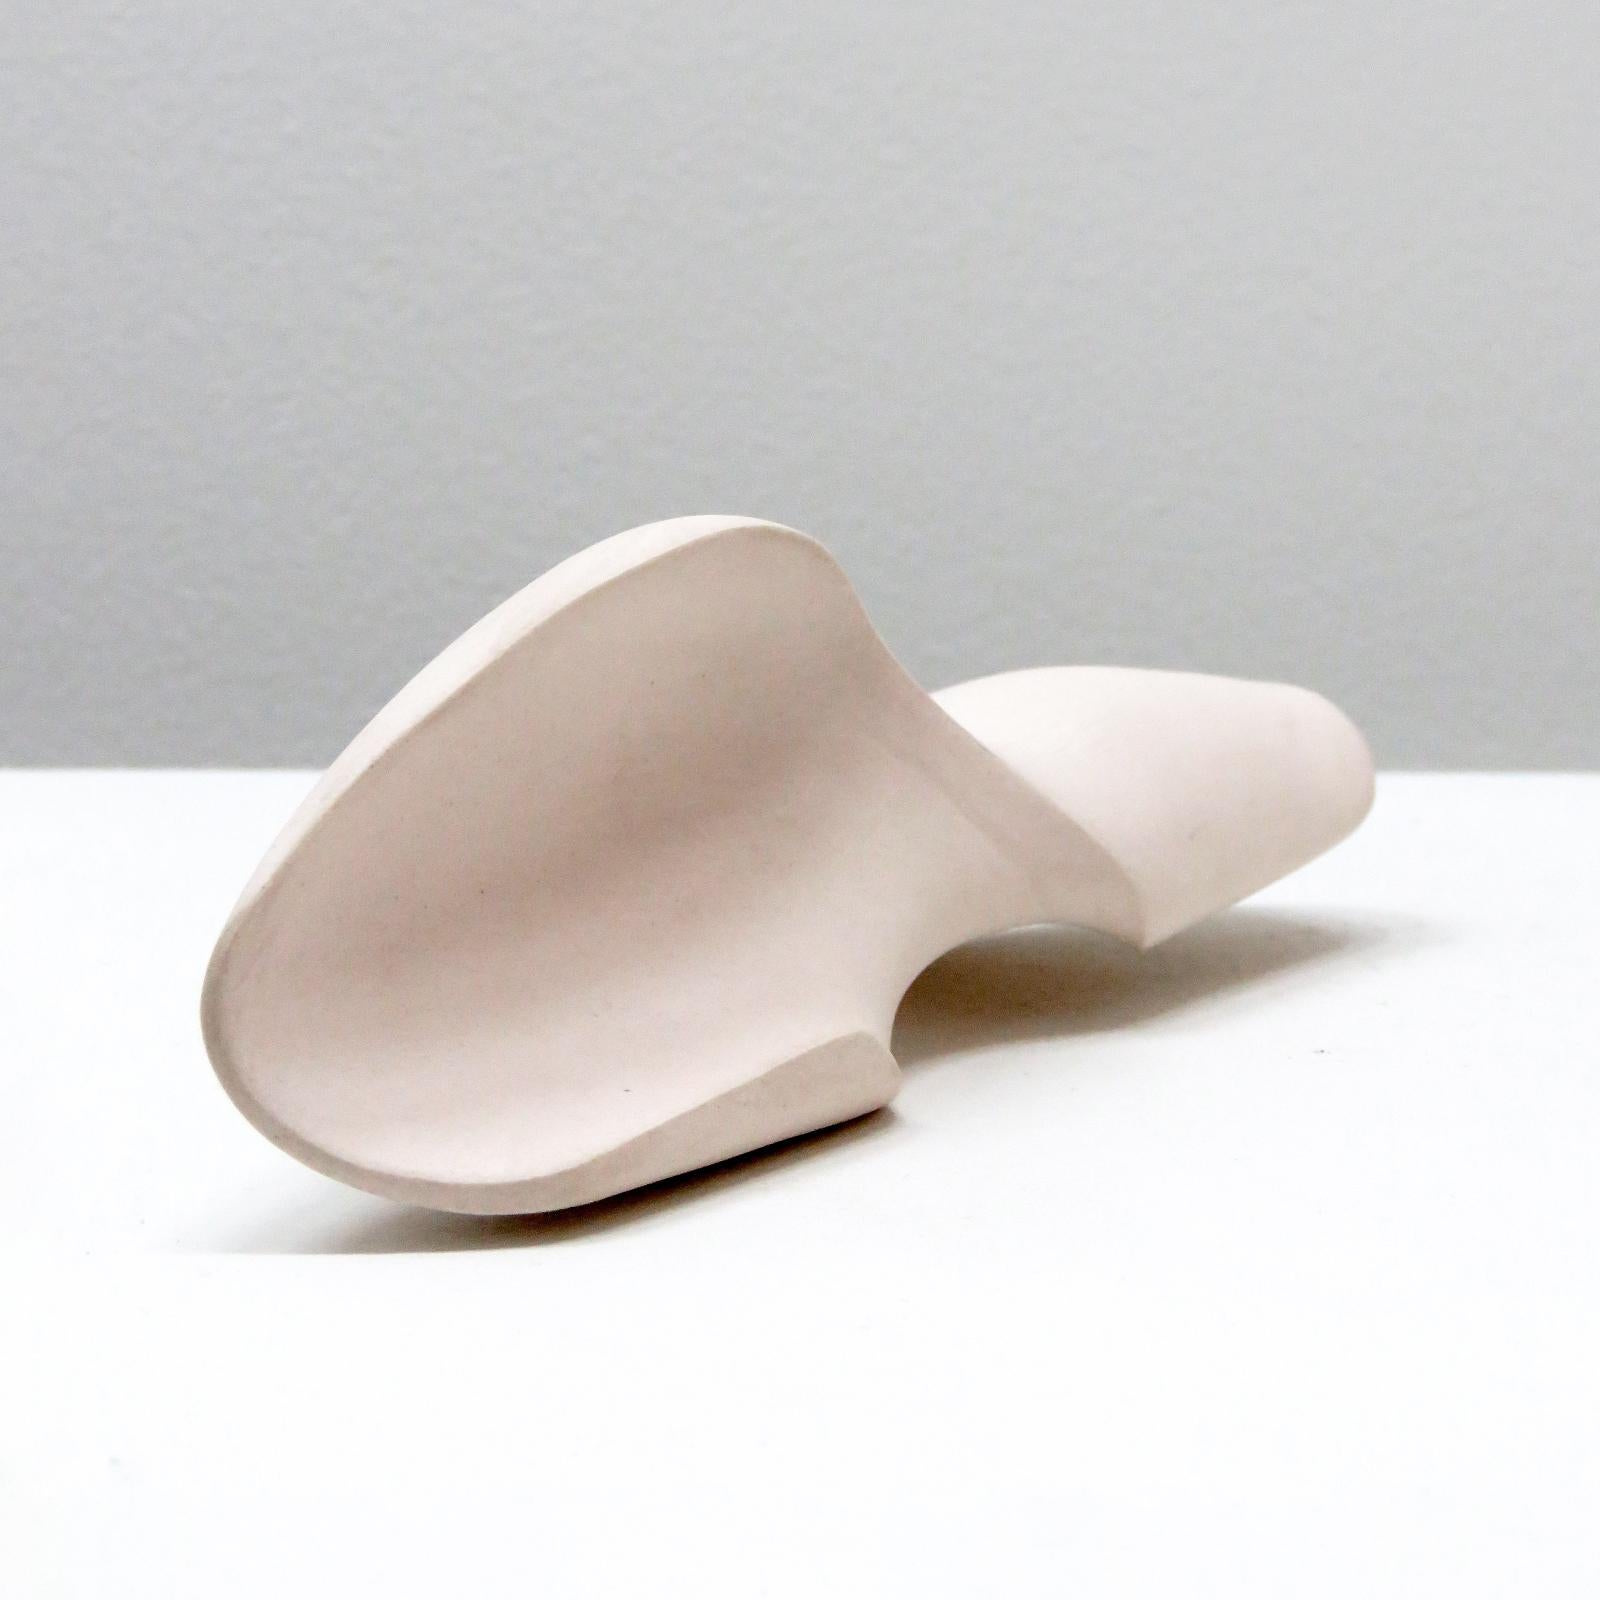 Sculptural Palmstone 'Propeller' by Jed Farlow  For Sale 1